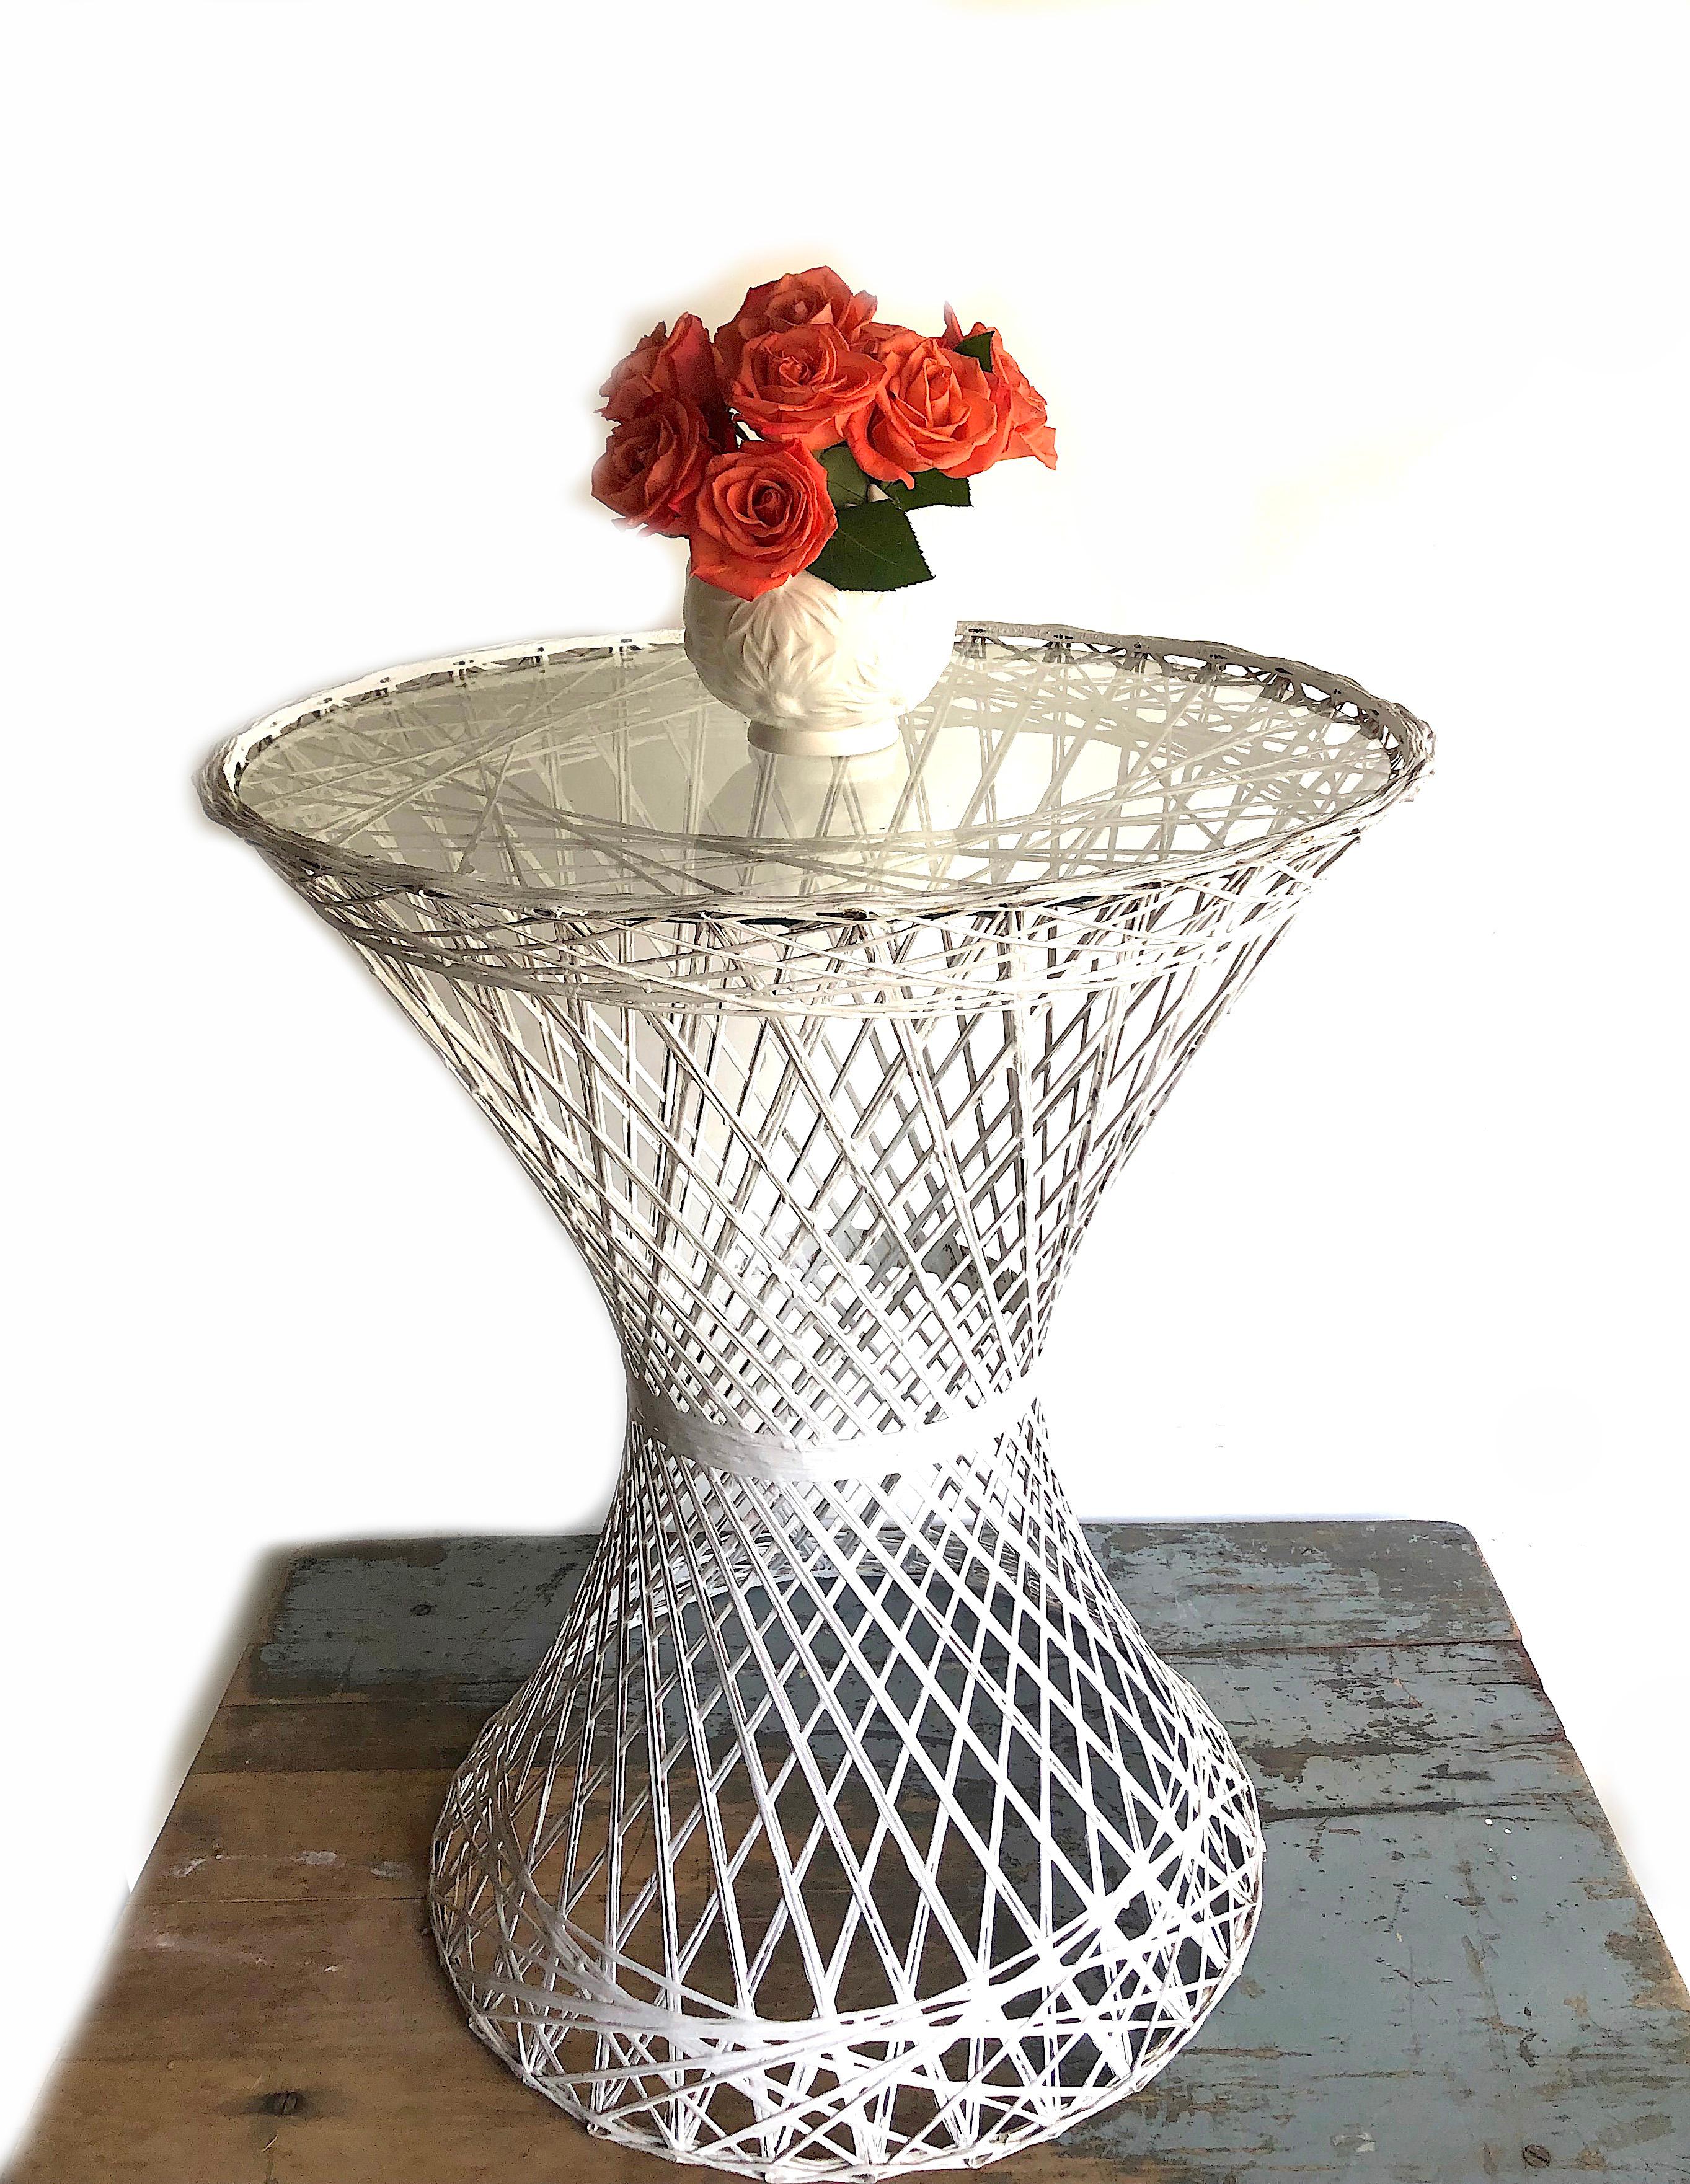 Side or bistro table by Russell Woodard for his family company's popular line of spun fiberglass patio furniture. The design features an hourglass shape and round pedestal base. The frame is an intricate lattice of fiberglass spokes with a white